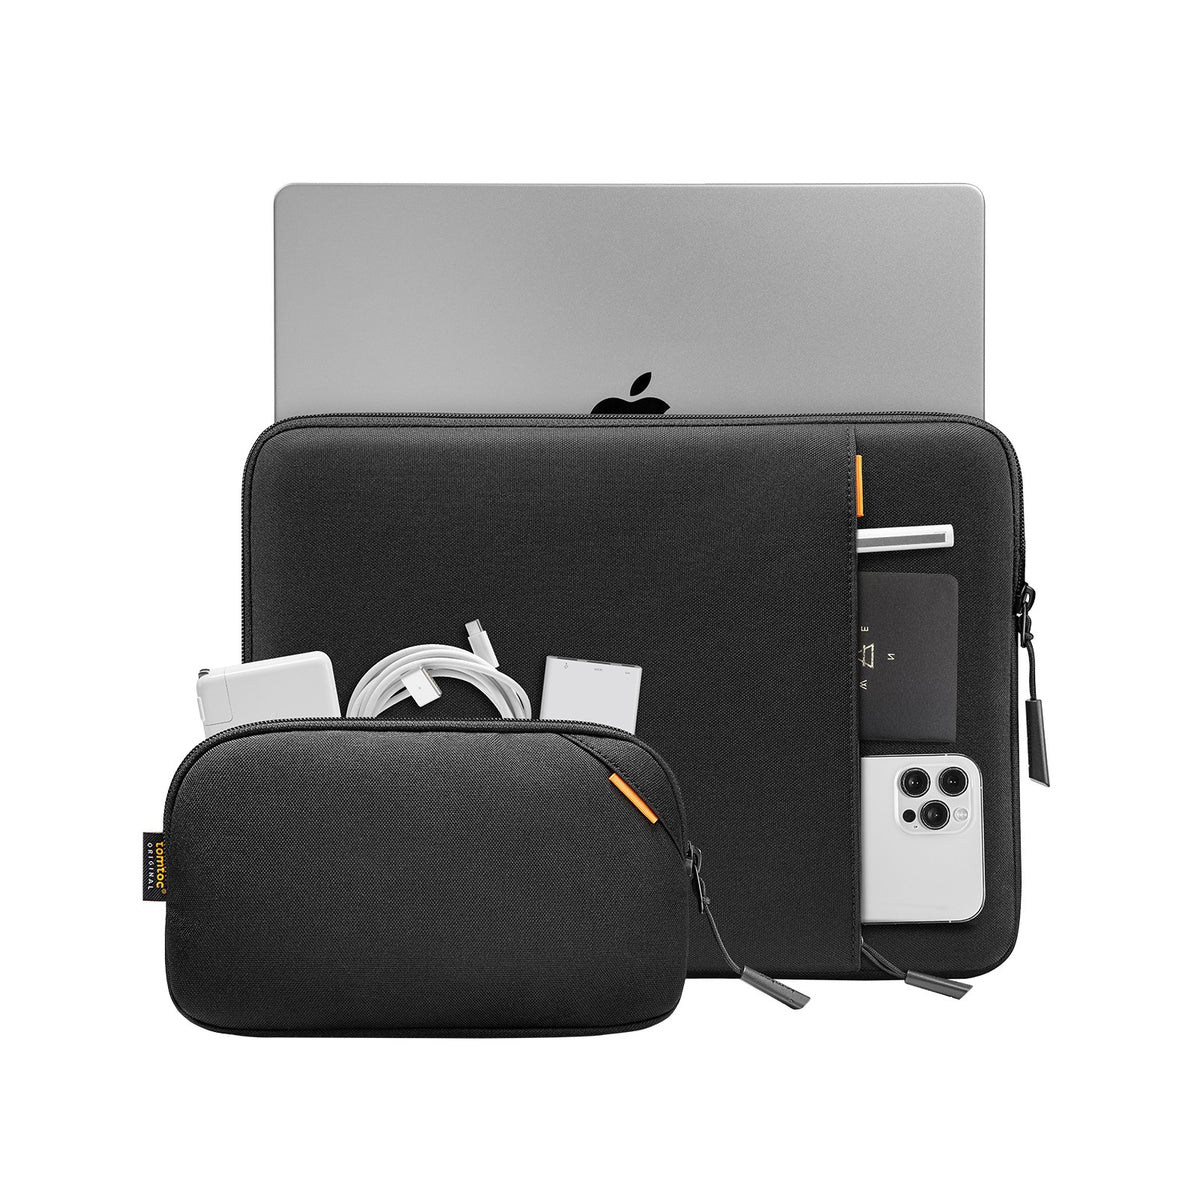 secondary_Defender-A13 Laptop Sleeve Kit For 16